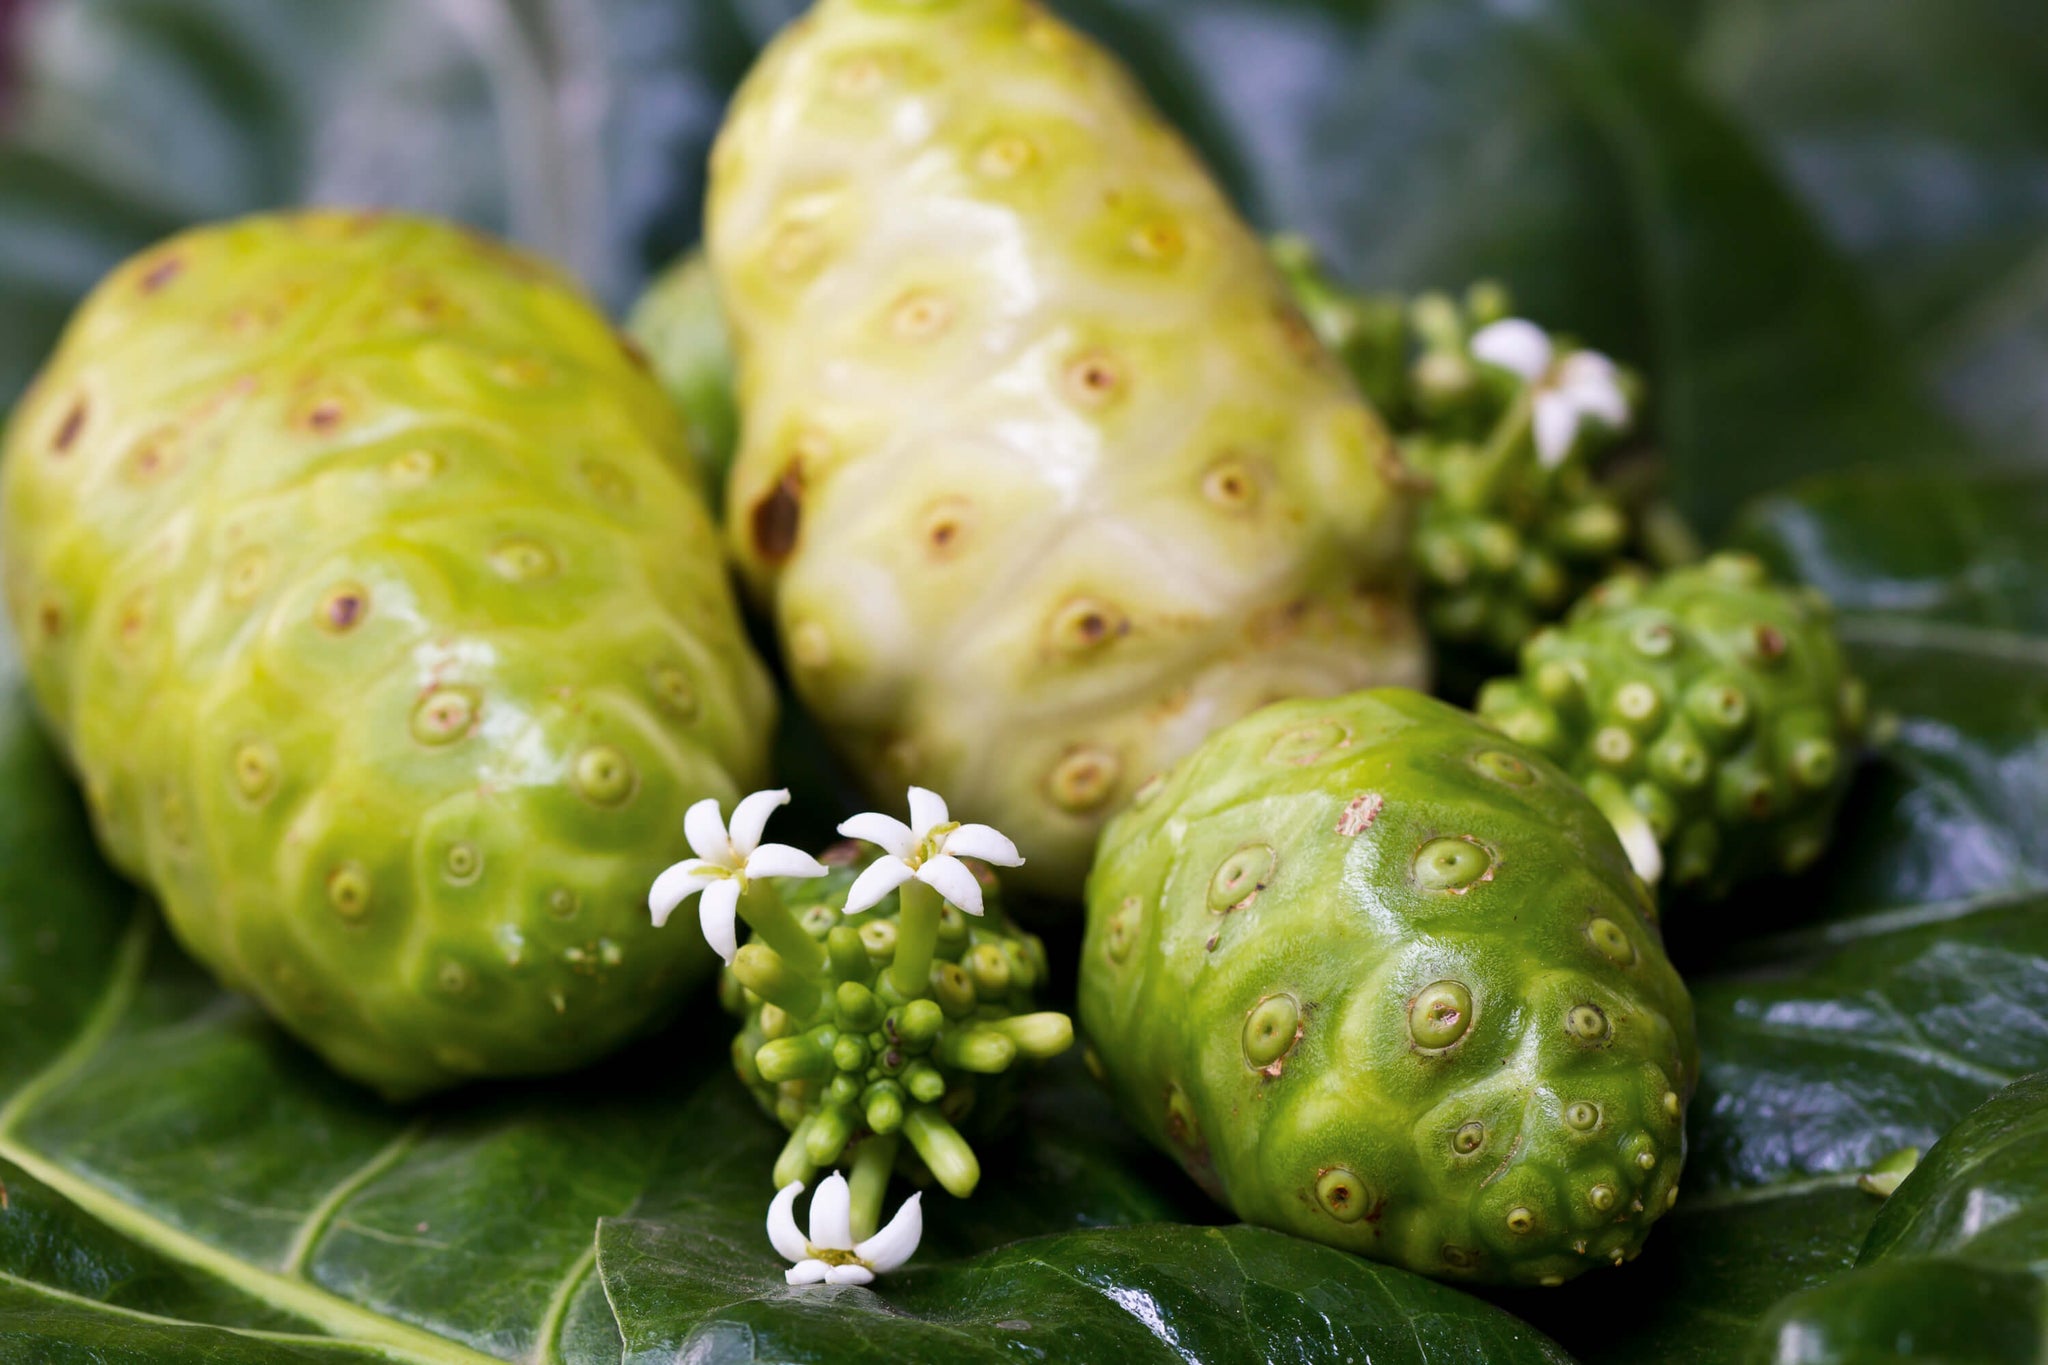 Noni juice has been appreciated due to its pain-relieving effects